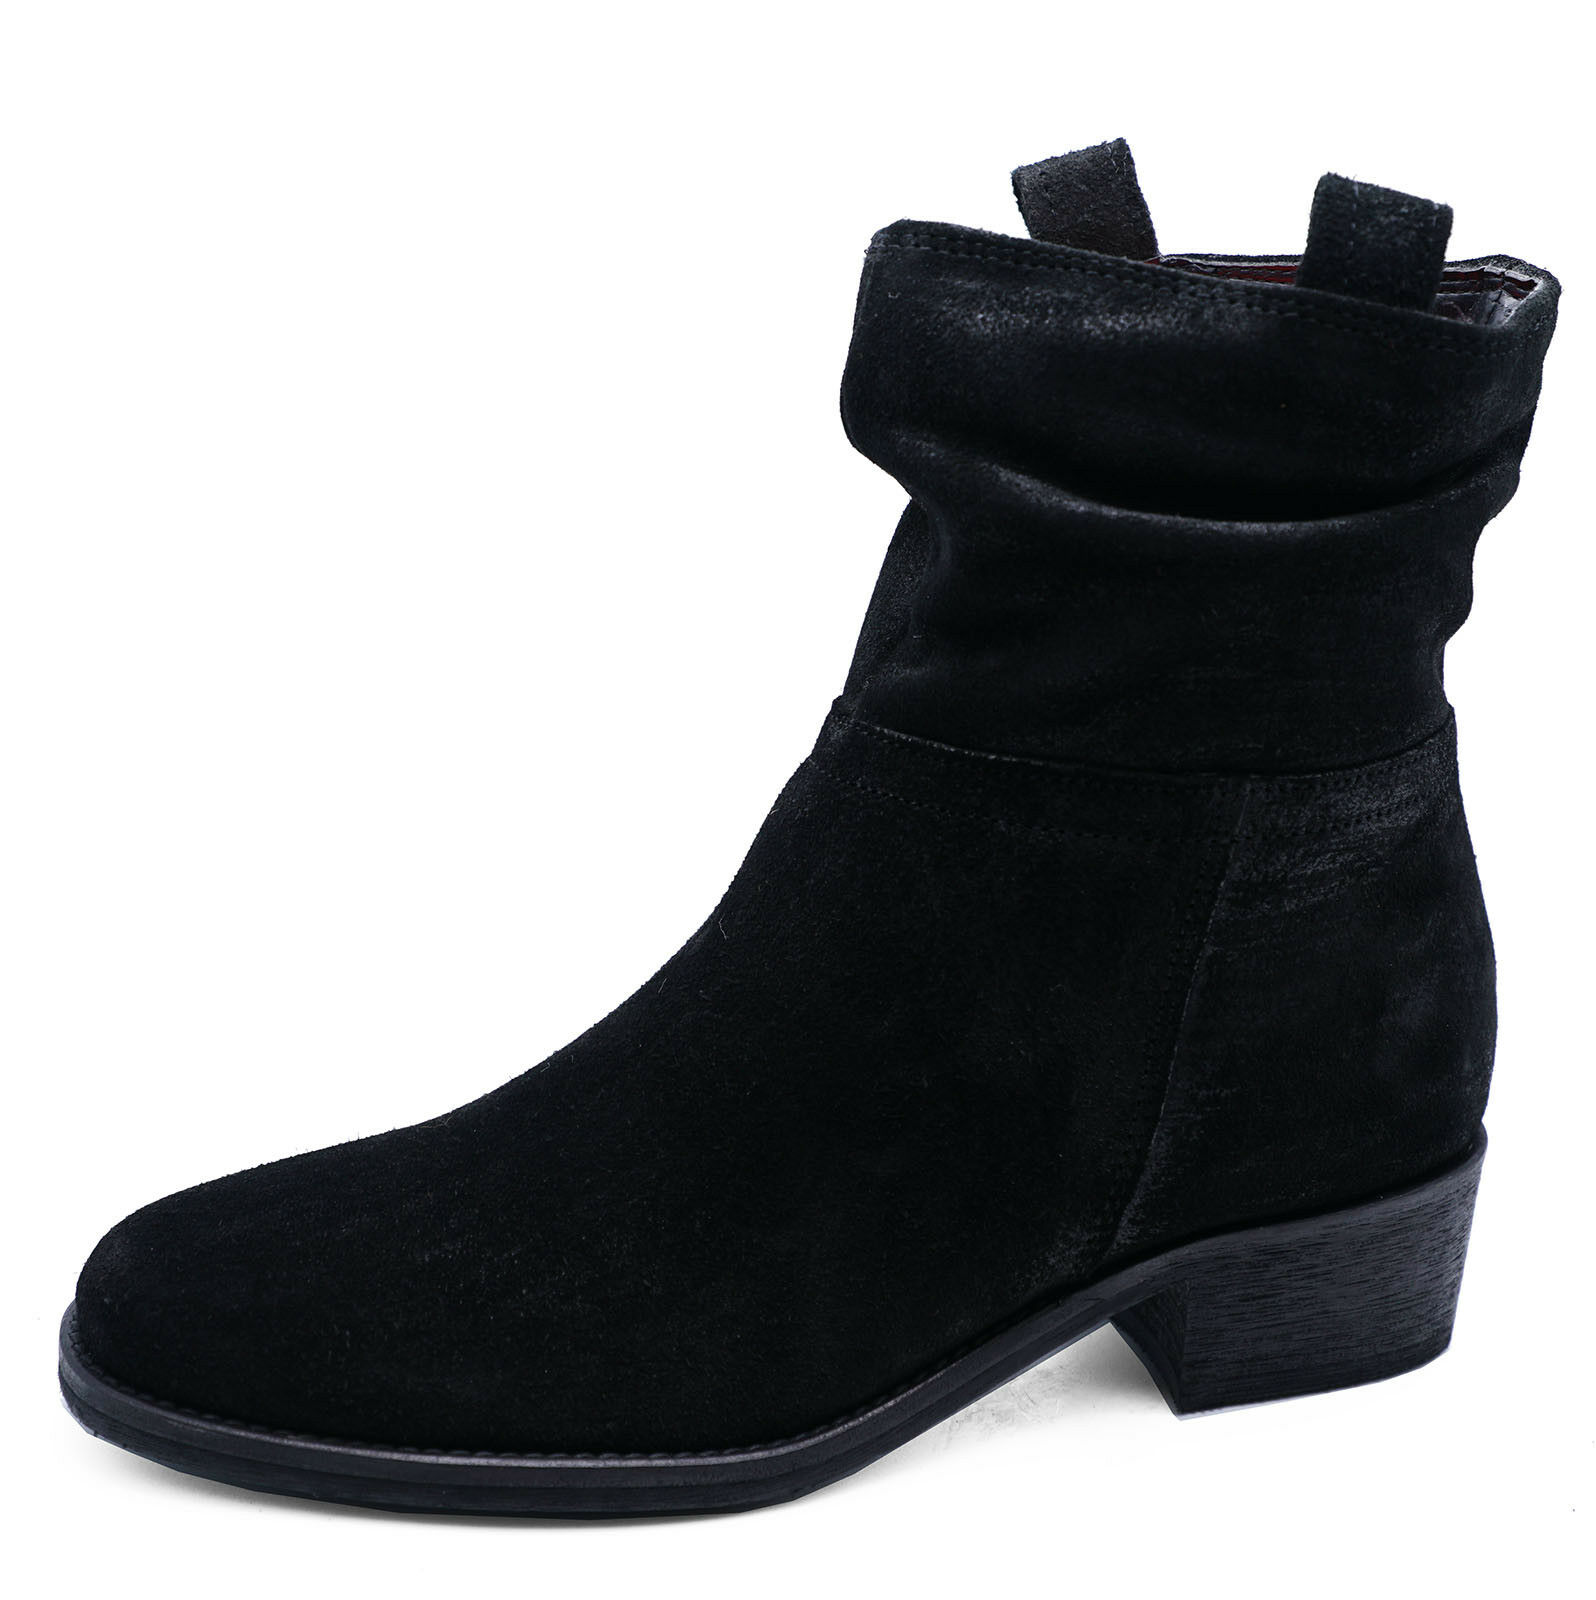 slouch boots uk